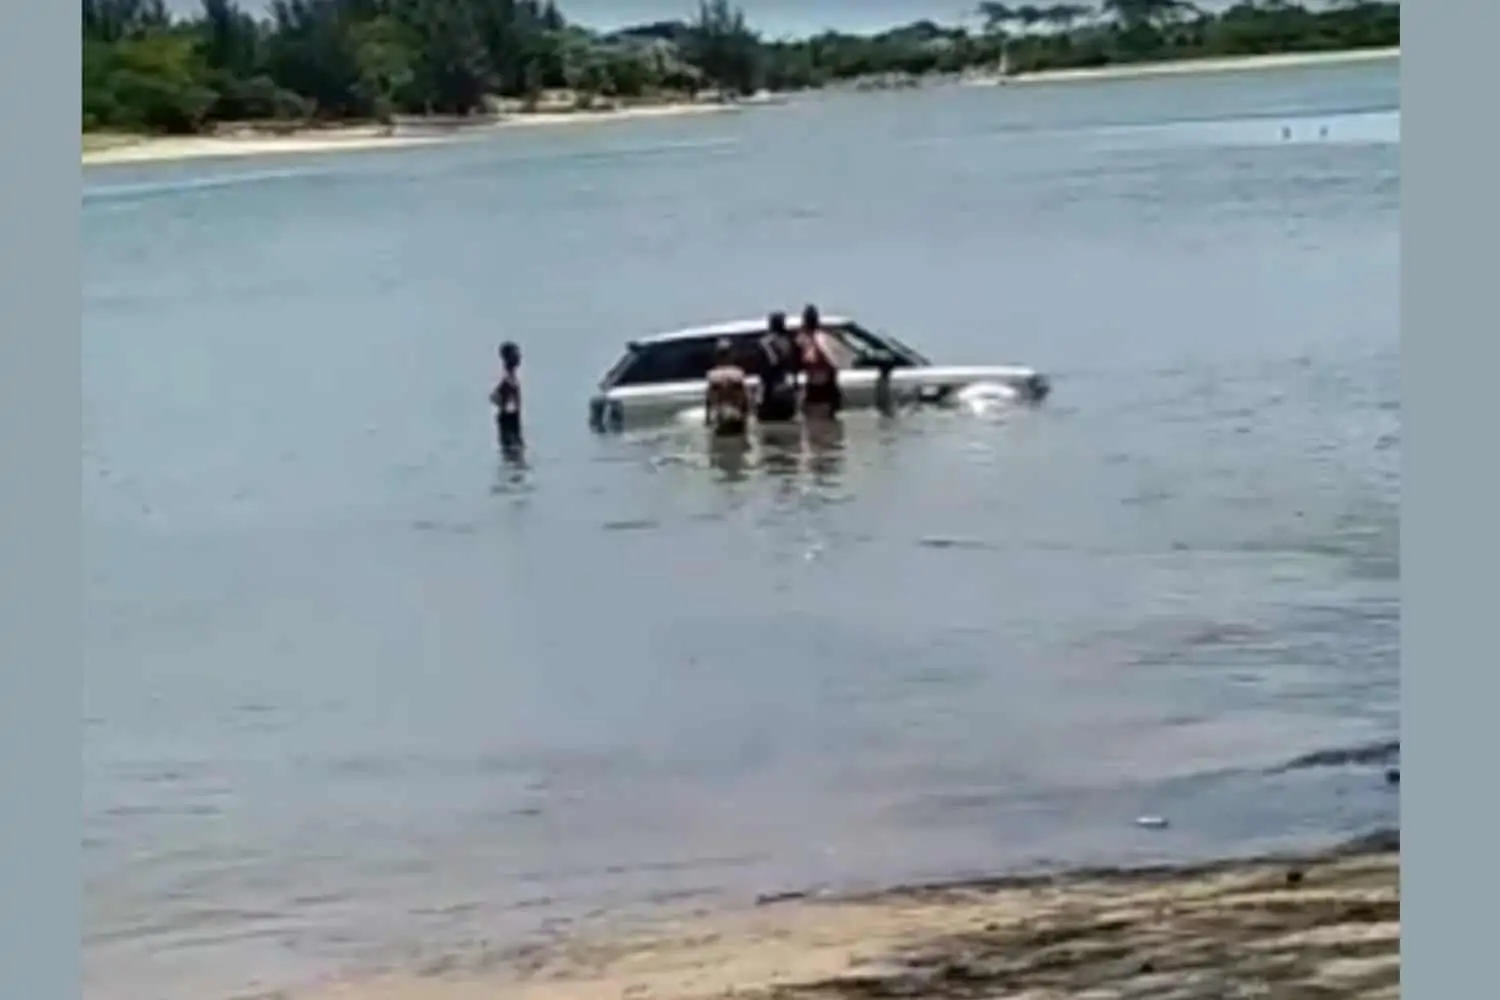 Range Rover ends up in ocean as drifting skills goes wrong